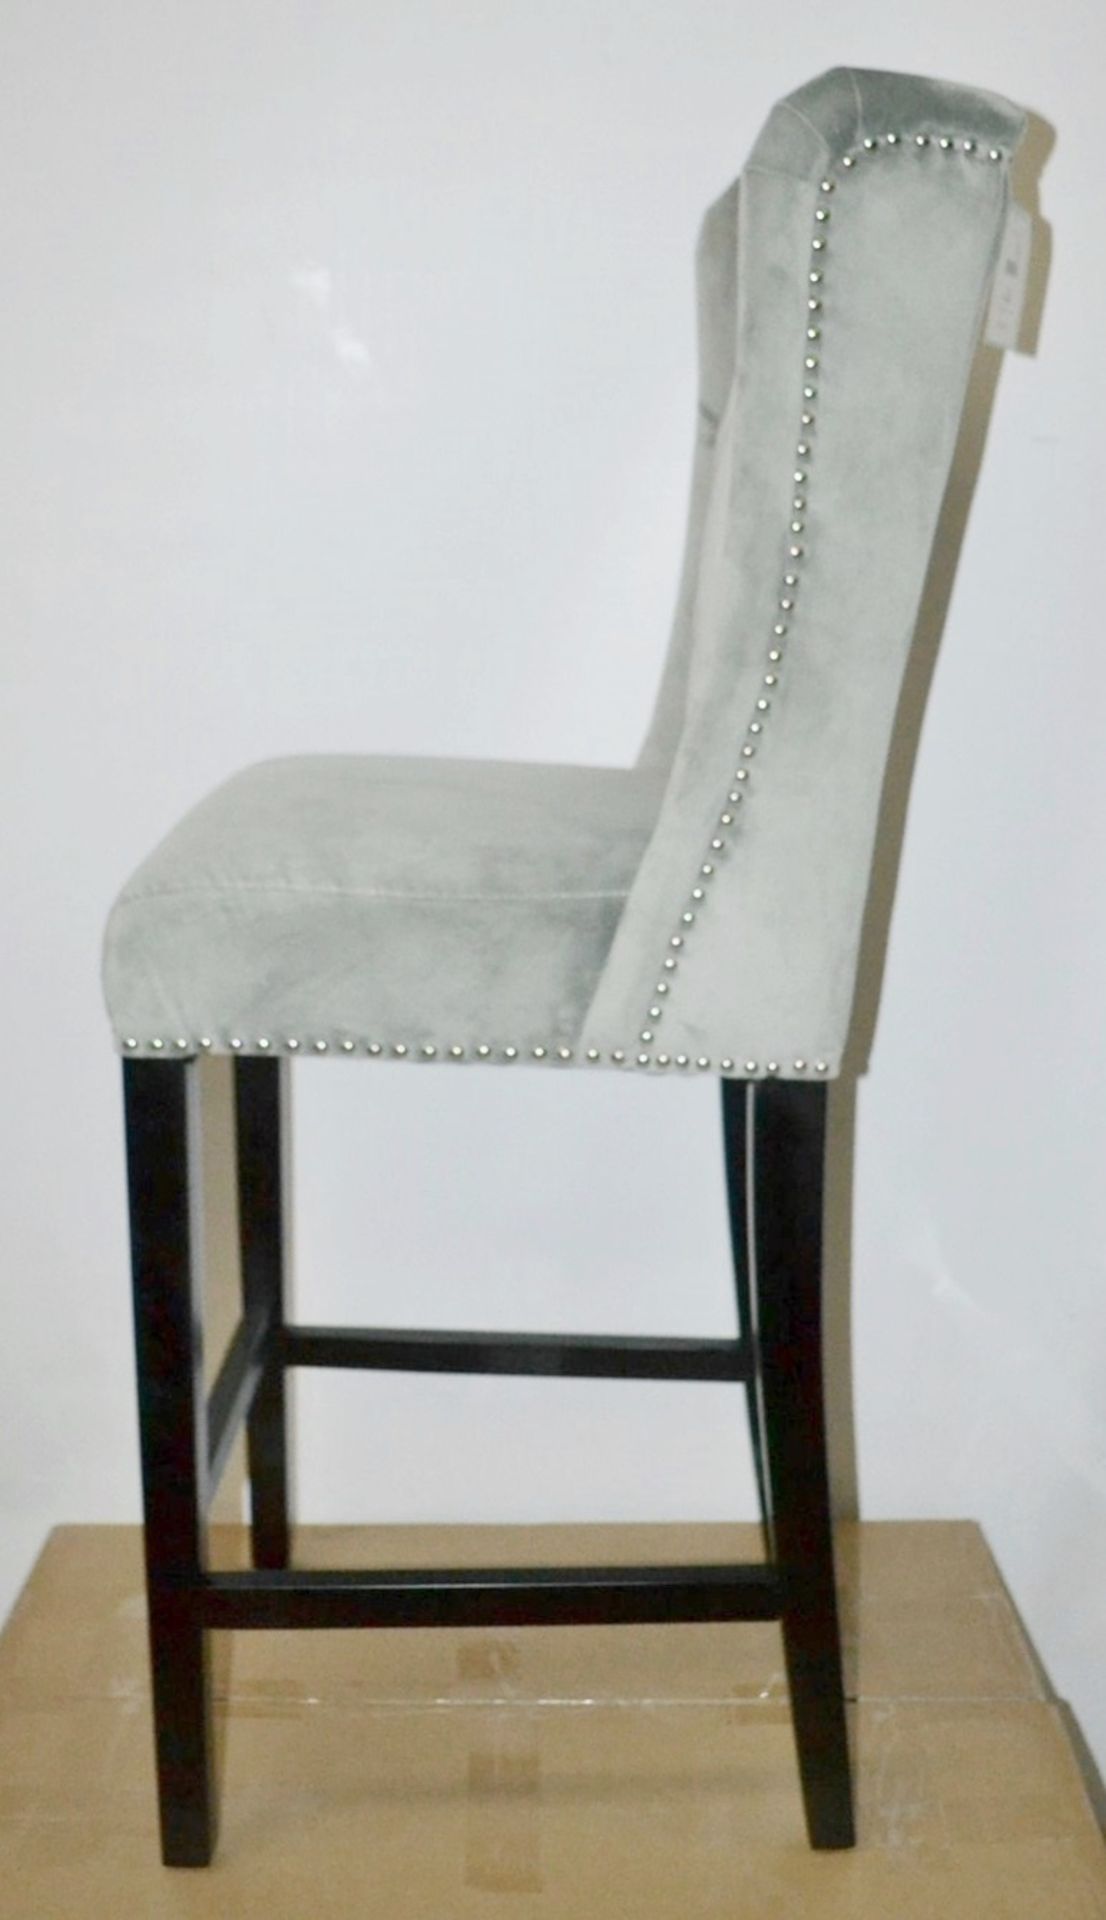 4 x HOUSE OF SPARKLES Luxury Wing Back Bar Stools In A Silver Velvet With BLACK Legs - Image 2 of 8